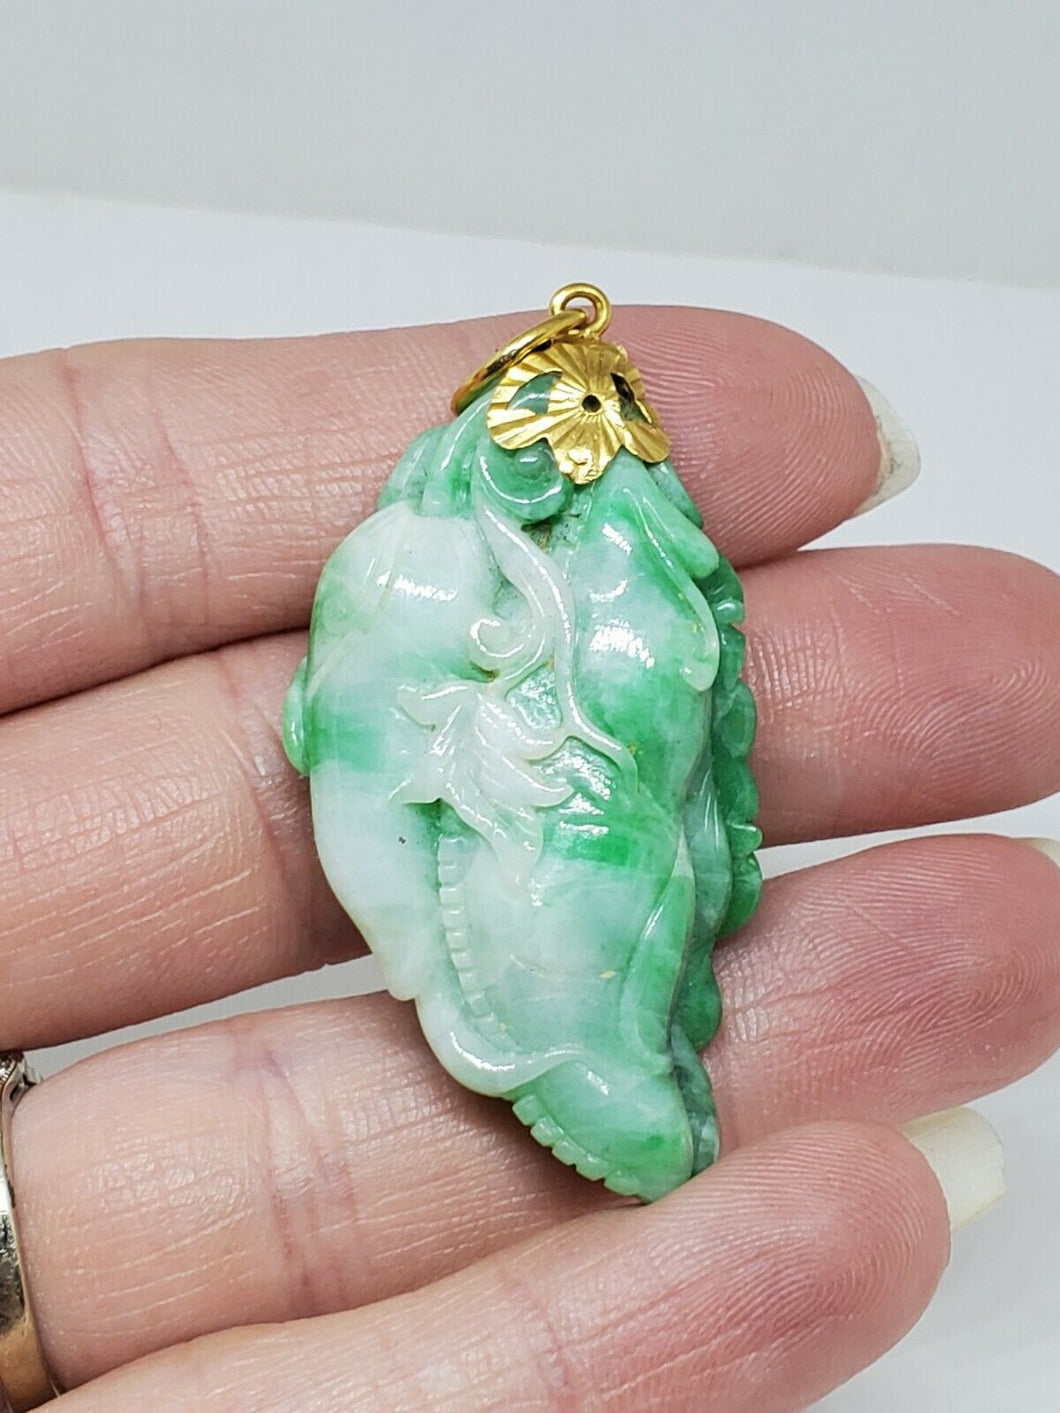 Vintage 22k Yellow Gold Hand Carved Apple Green Jade Peppers Pendant Necklace